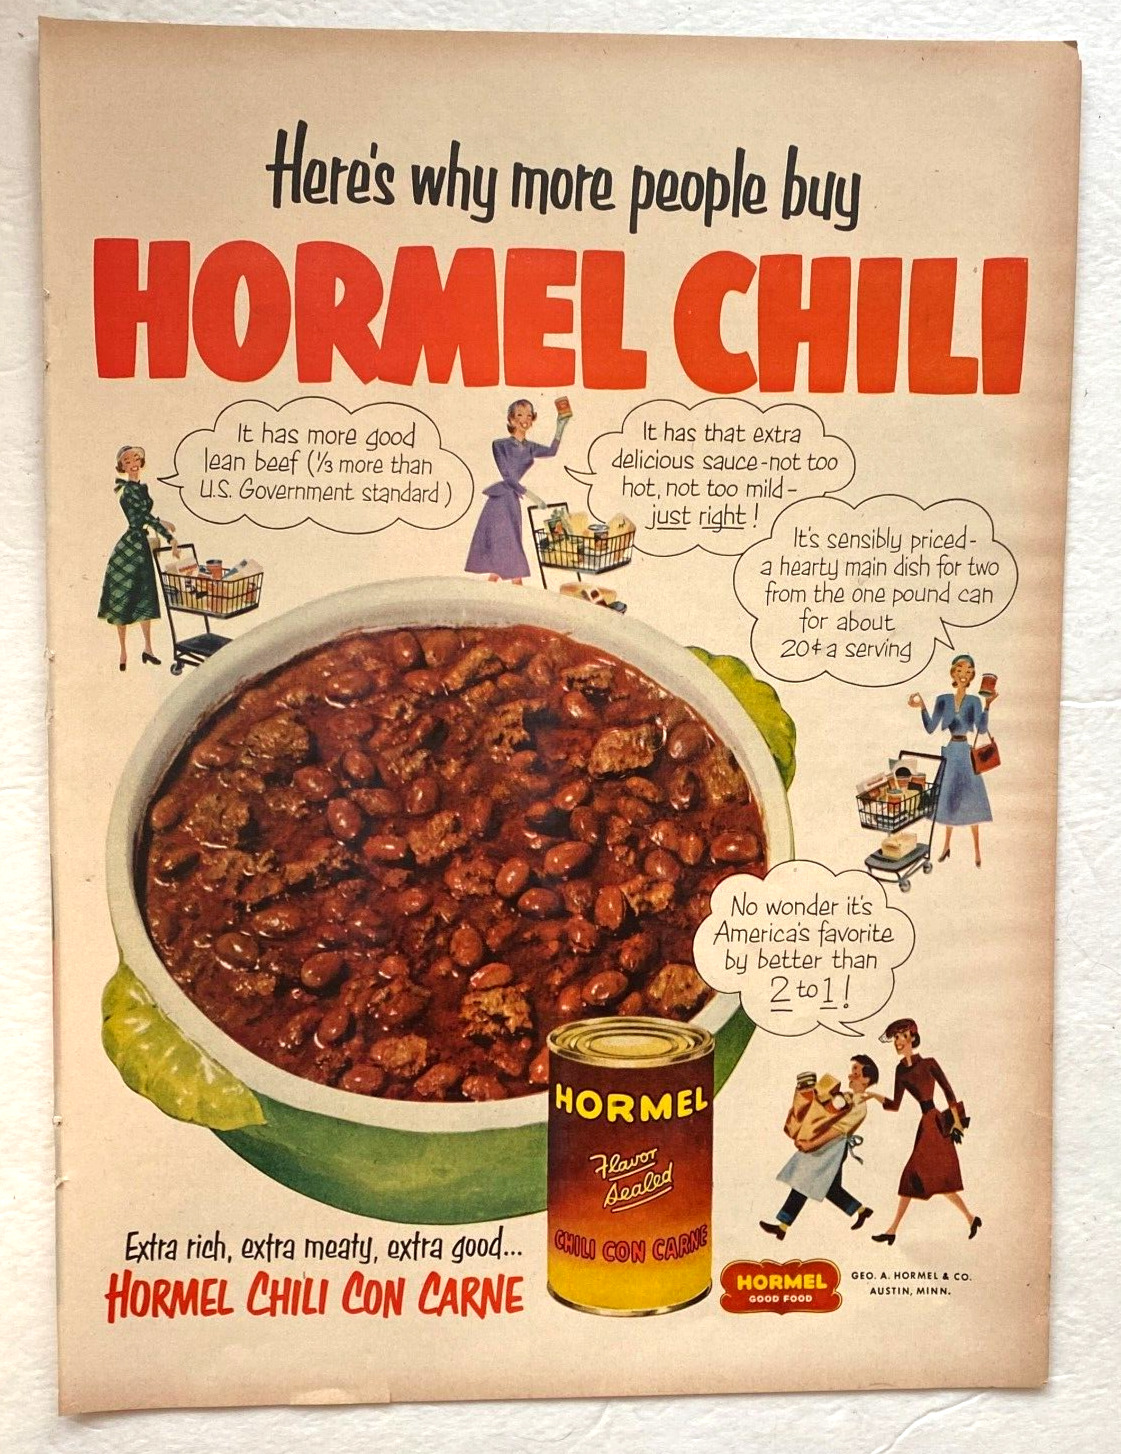 Hormel Chili Vintage Print Ad 1952 Con Carne Extra Rich Meaty Good 10.5x14 In